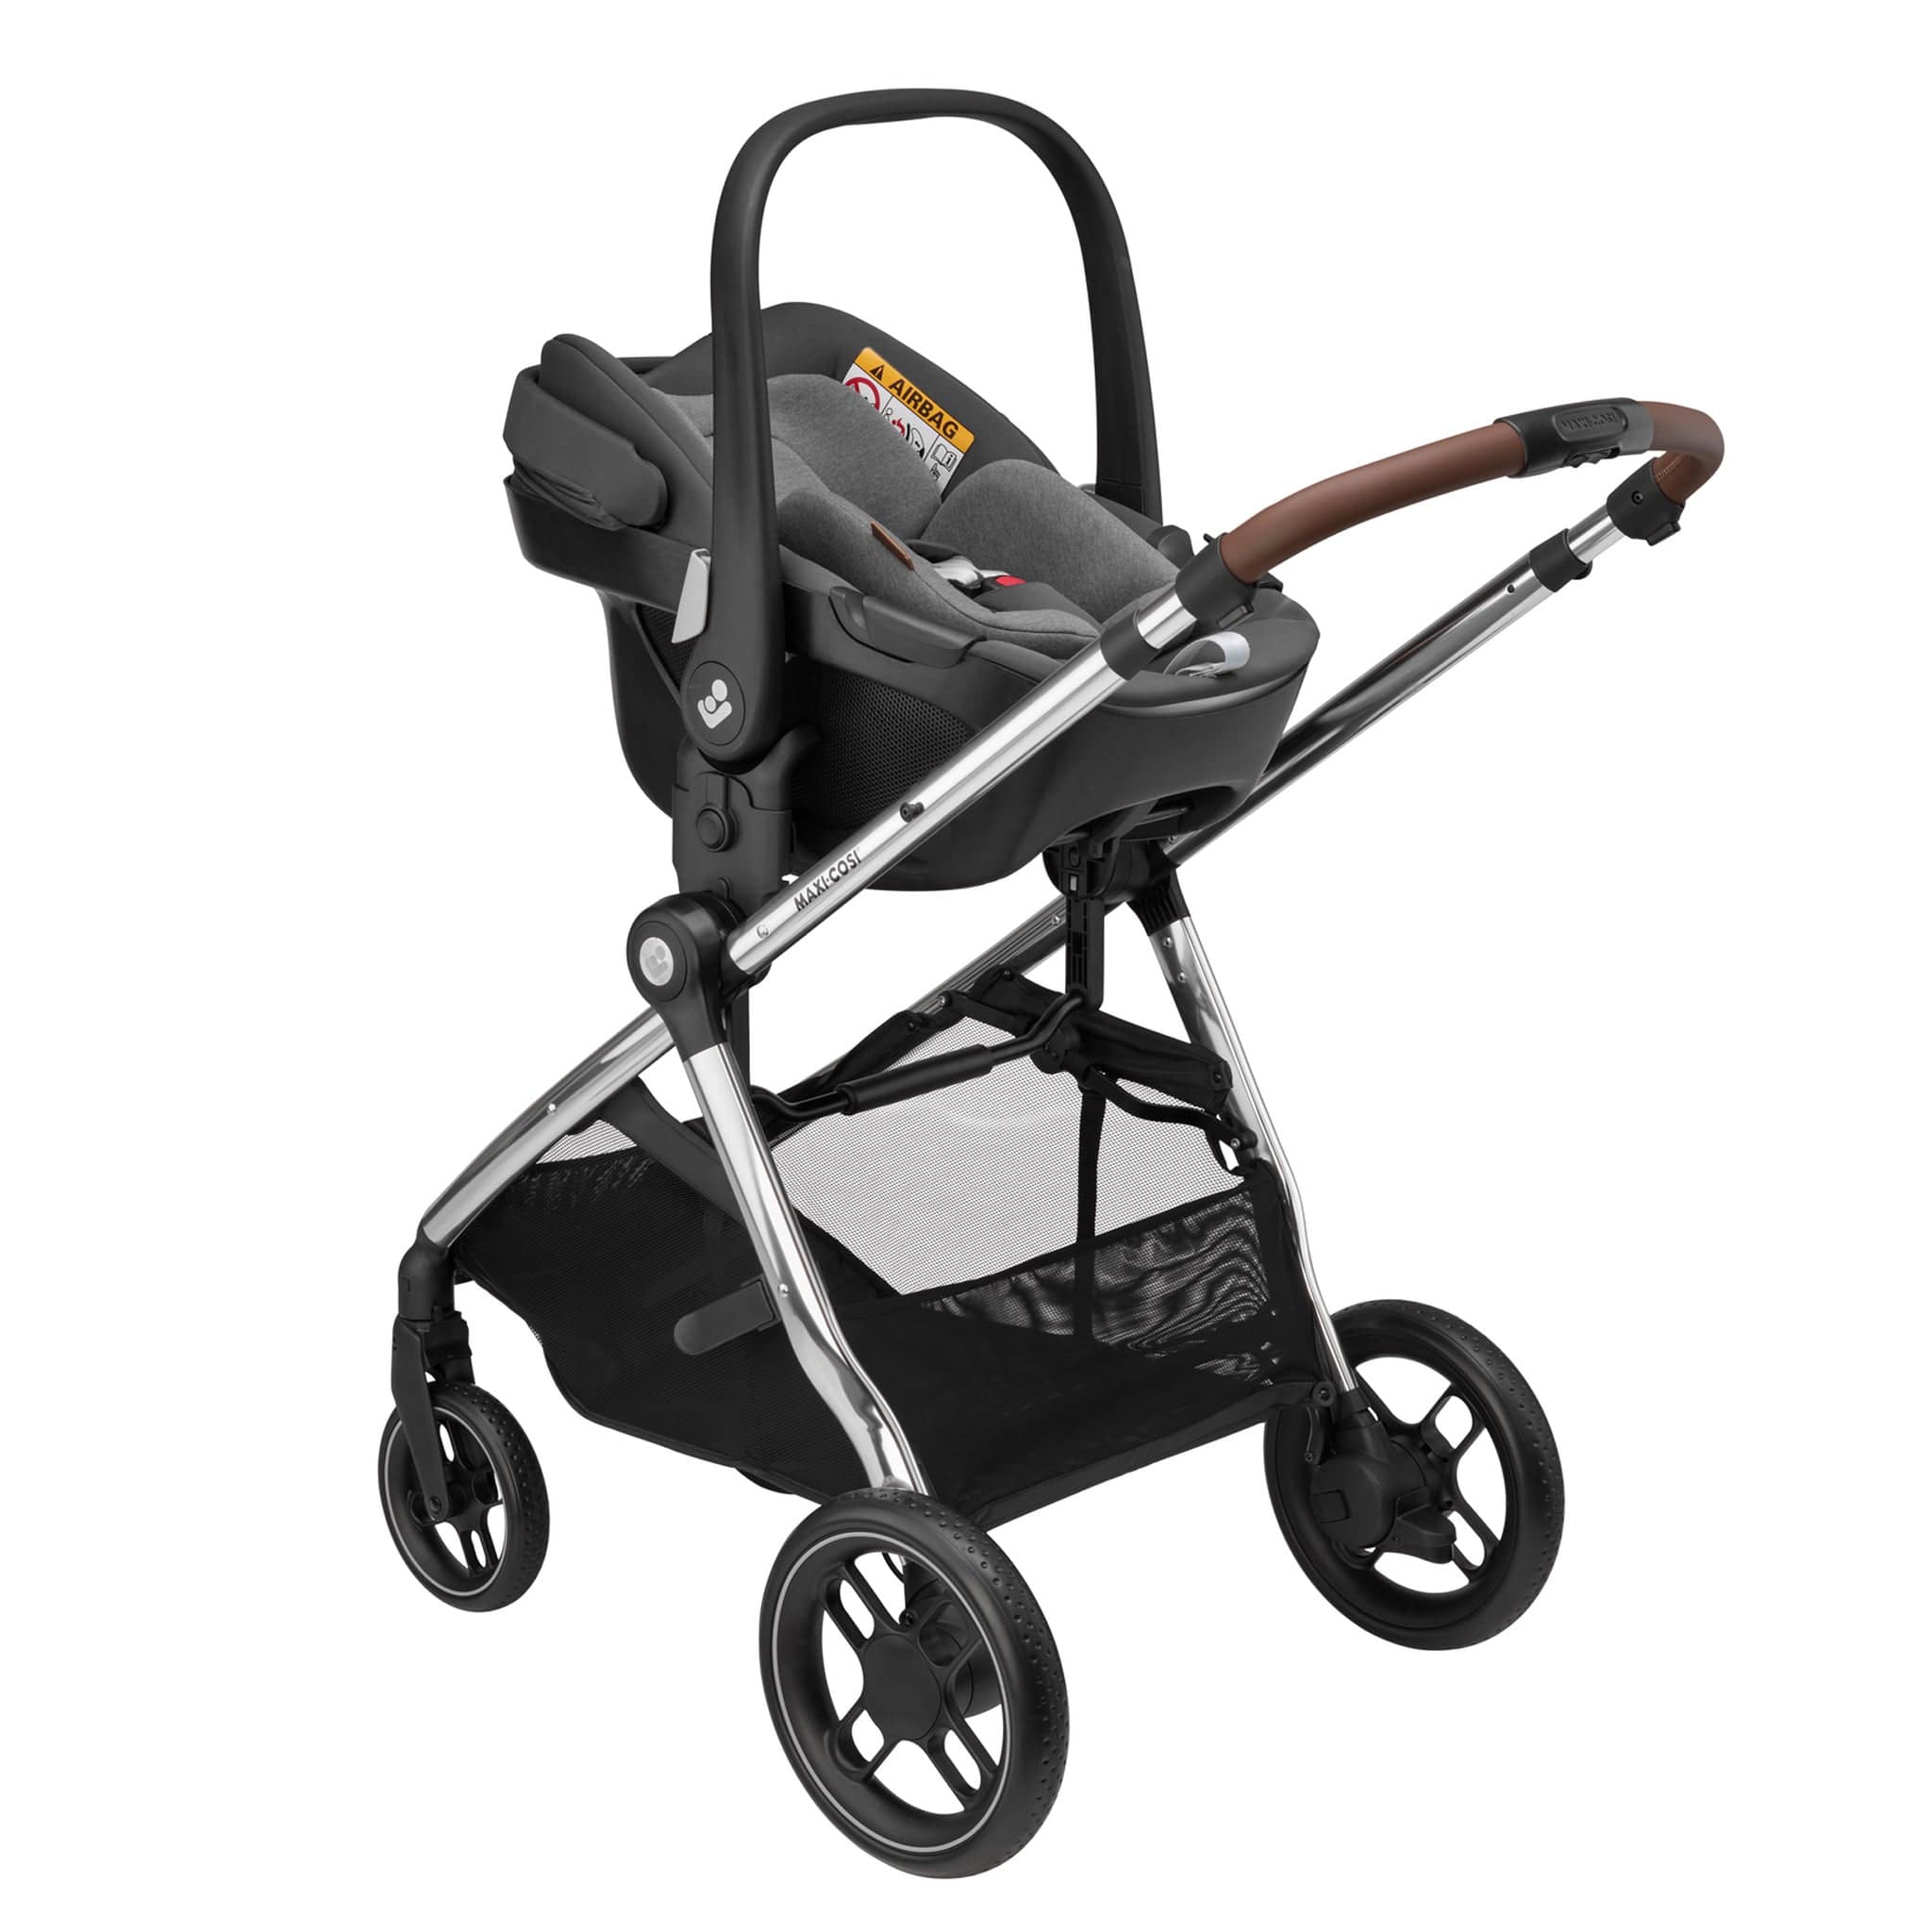 Maxi-Cosi Zelia Luxe with Cabriofix i-Size & Base Travel System in Twillic Grey Travel Systems 11072-TWI-GRY 3220660337965